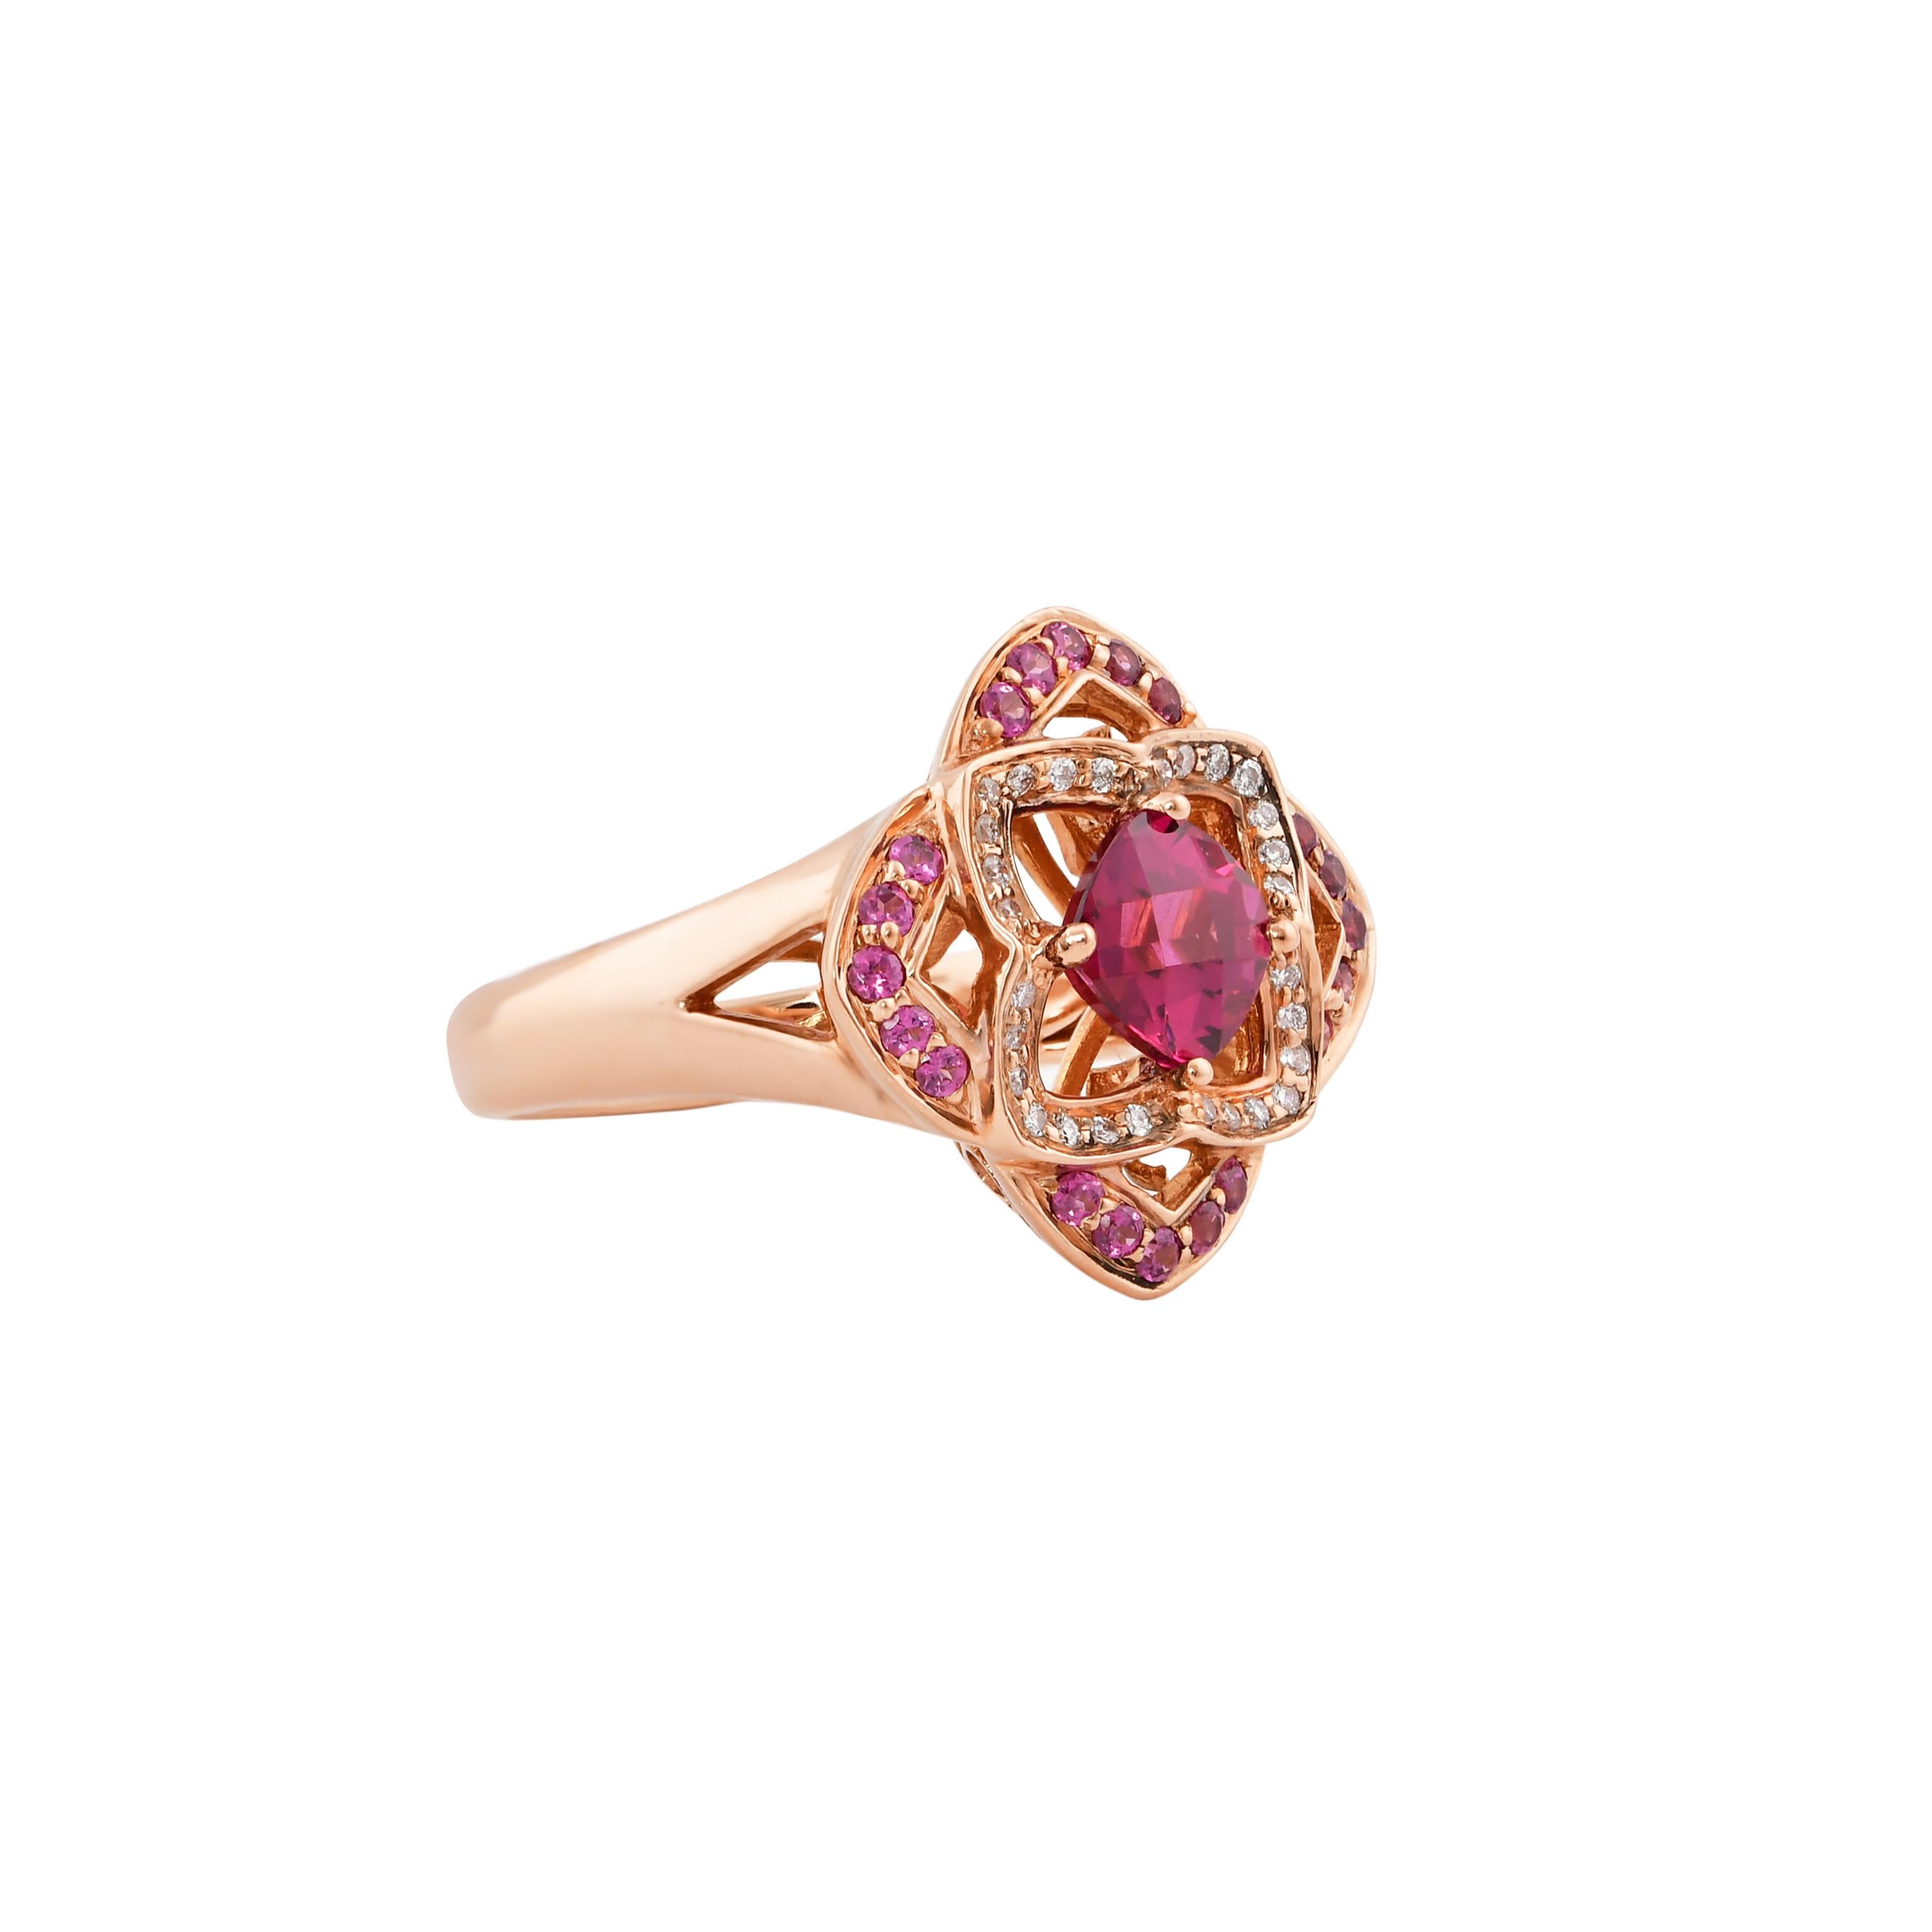 Glamorous Gemstones - Sunita Nahata started off her career as a gemstone trader, and this particular collection reflects her love for multi-colored semi-precious gemstones. This ring presents a radiant rhodolite center accented with pave rhodolites